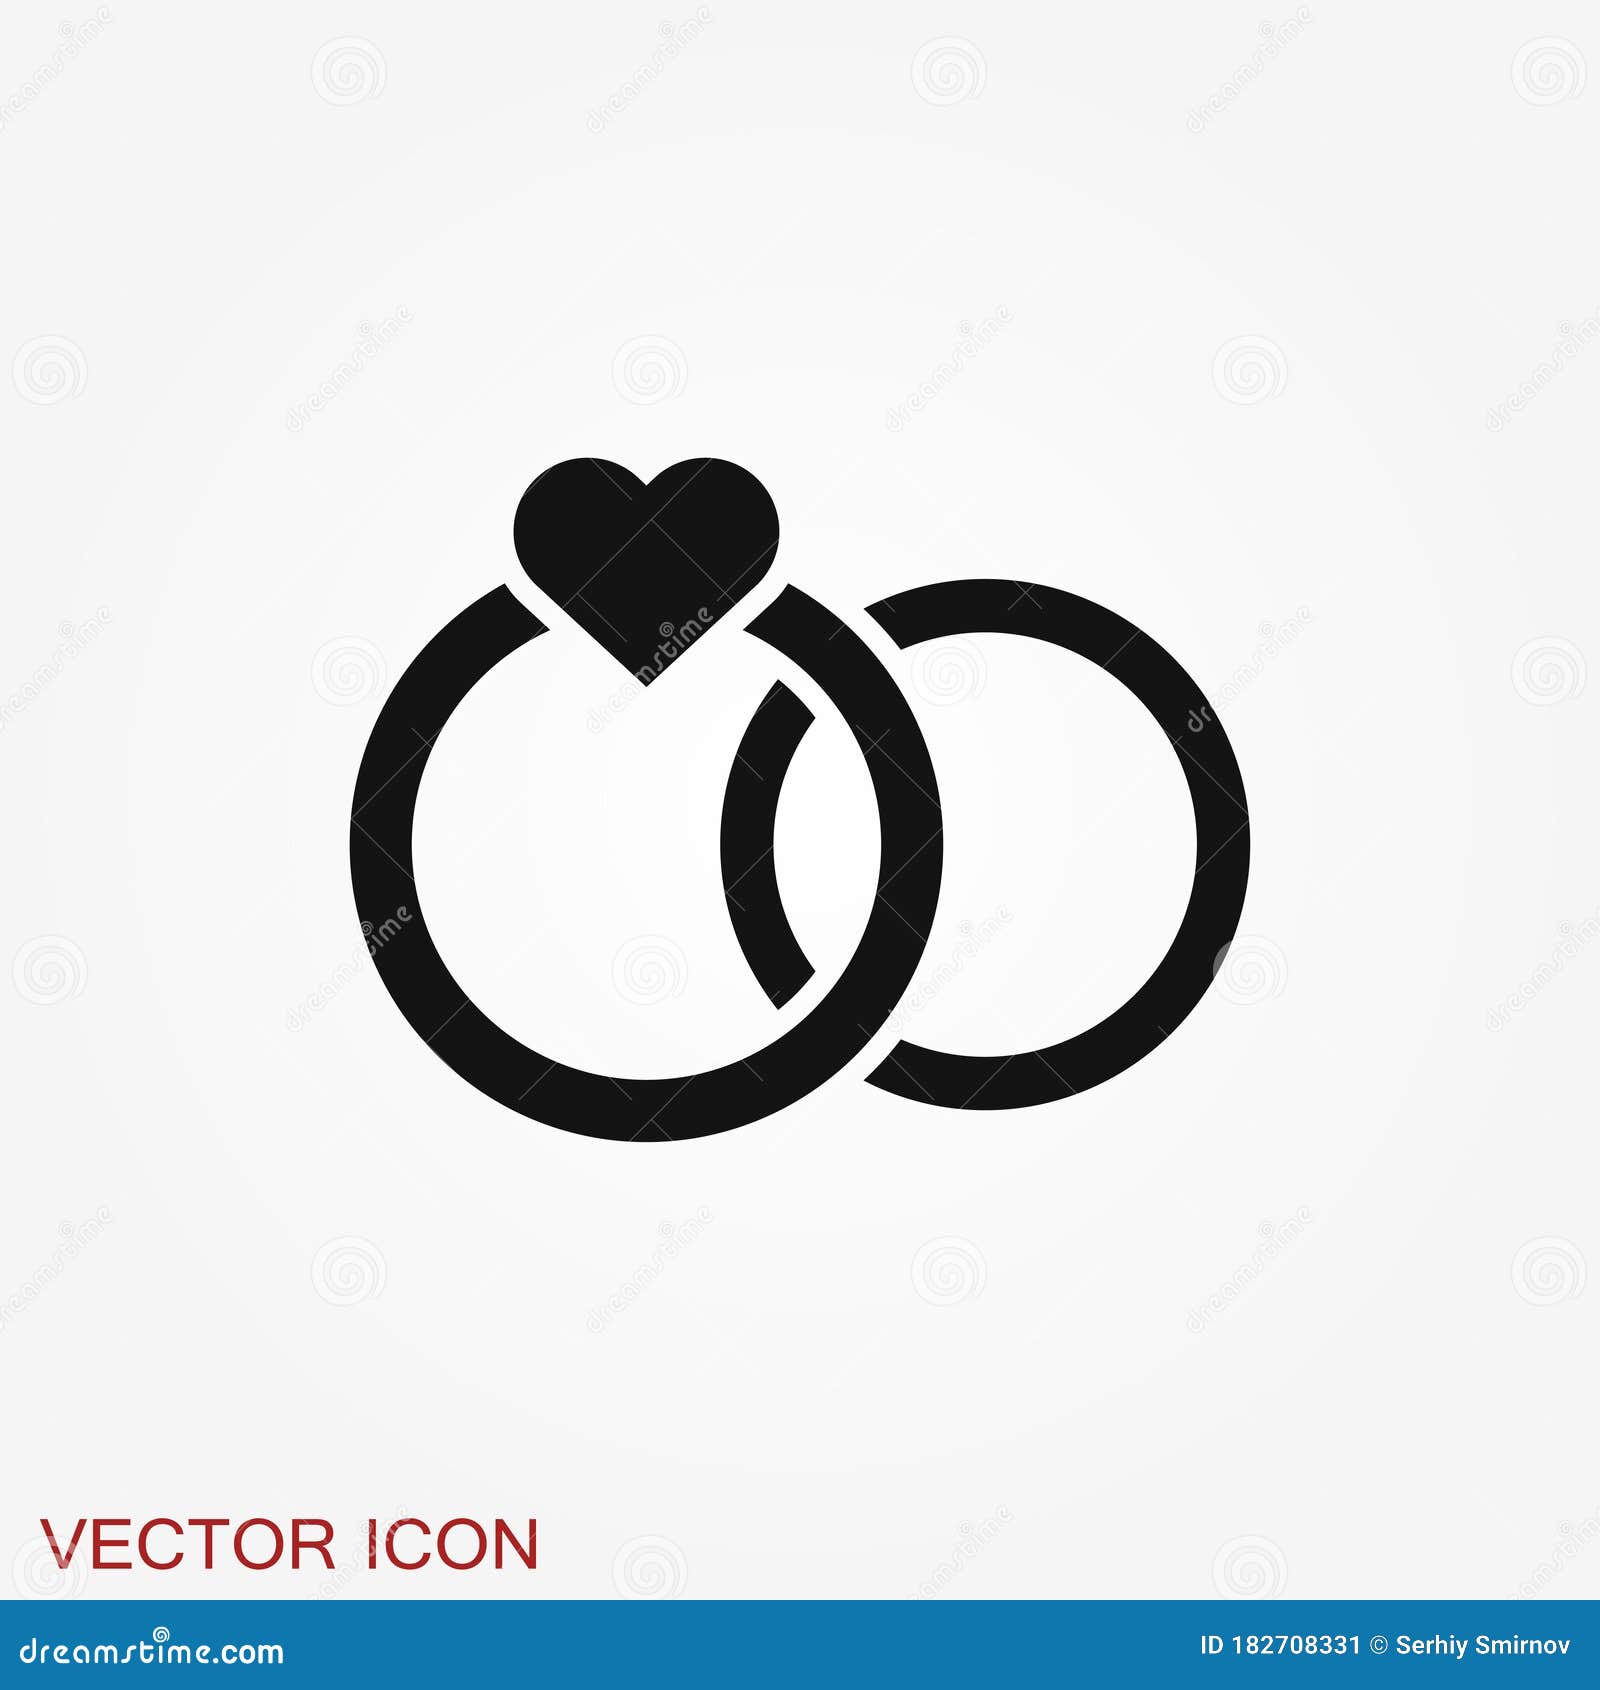 Vector 3 Wedding Ring Vector for Free Download | FreeImages